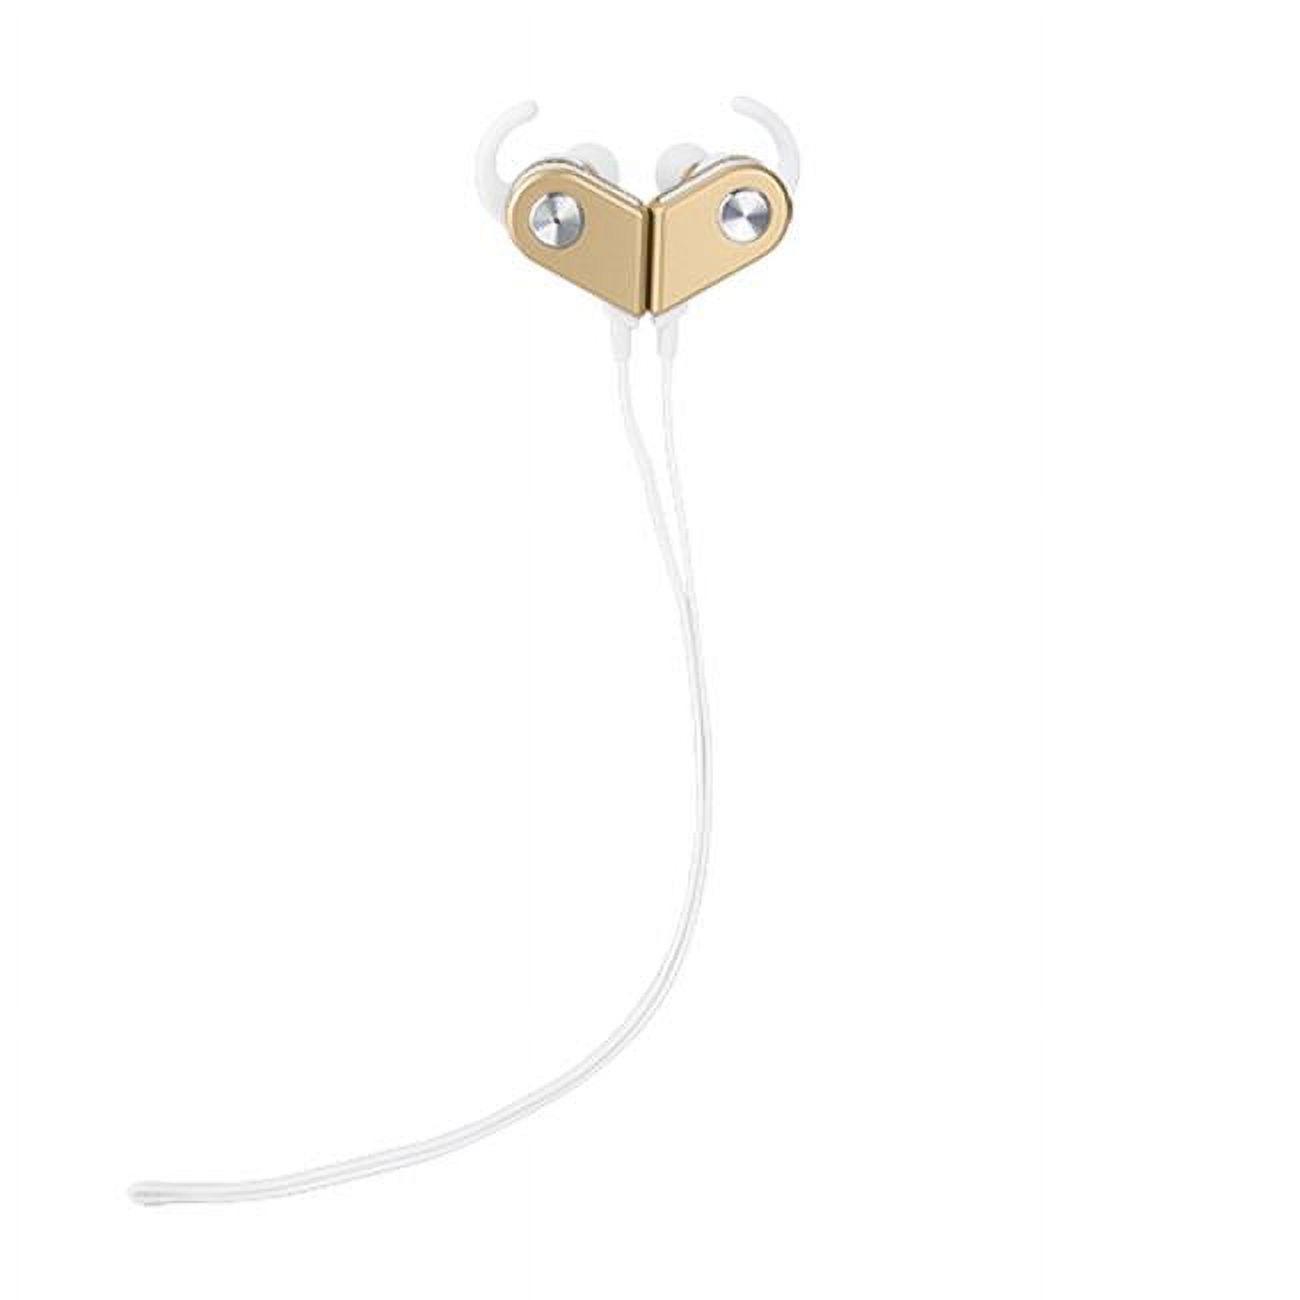 Magnetic Bluetooth Headphones Wireless Stereo Headset Earbuds Earphone Universal - Gold - image 1 of 1